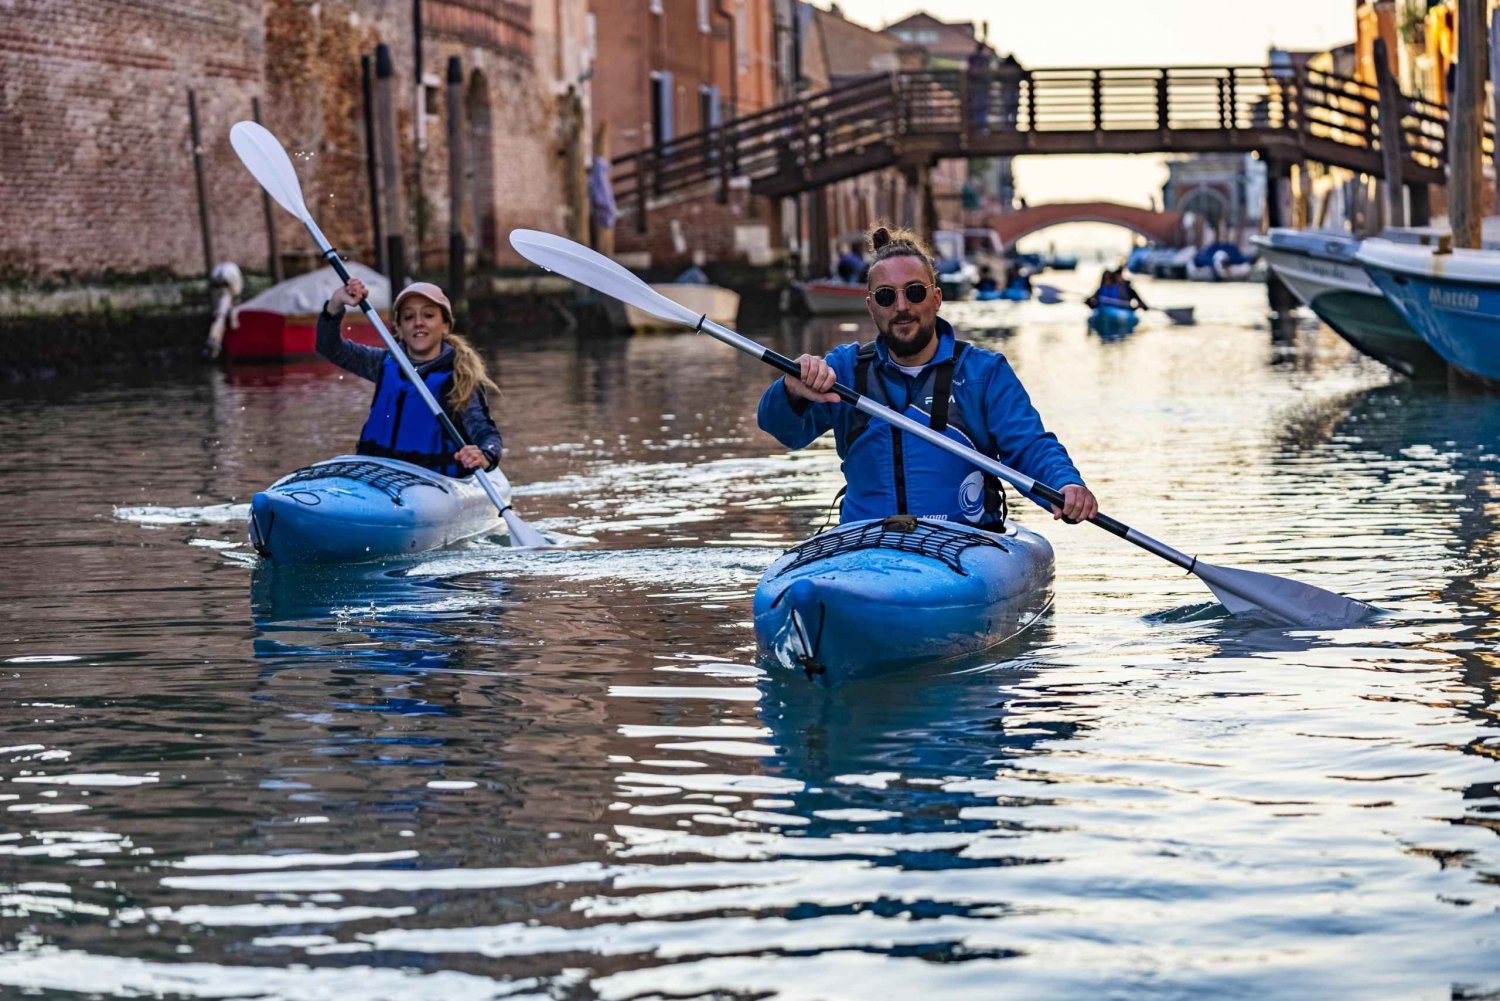 Venice Family Kayaking Class: training on the water